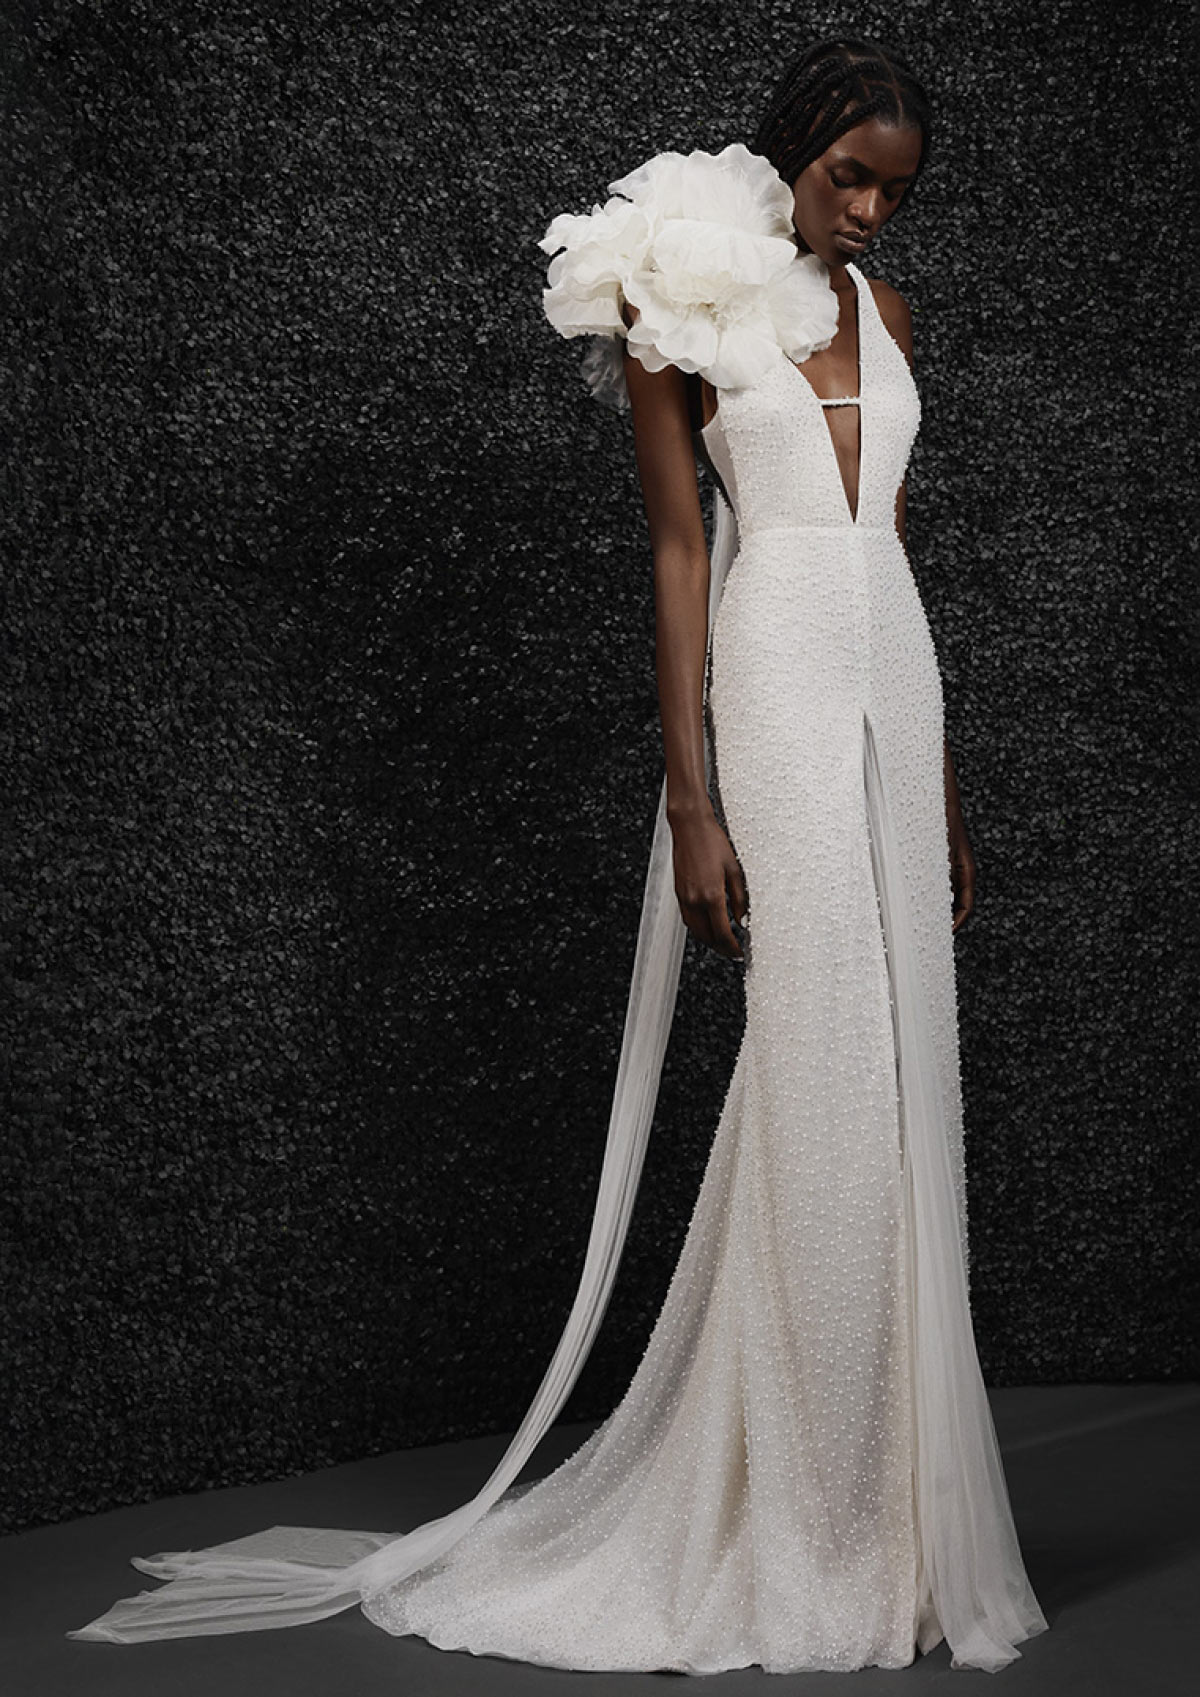 New Vera Wang collection unveiled!